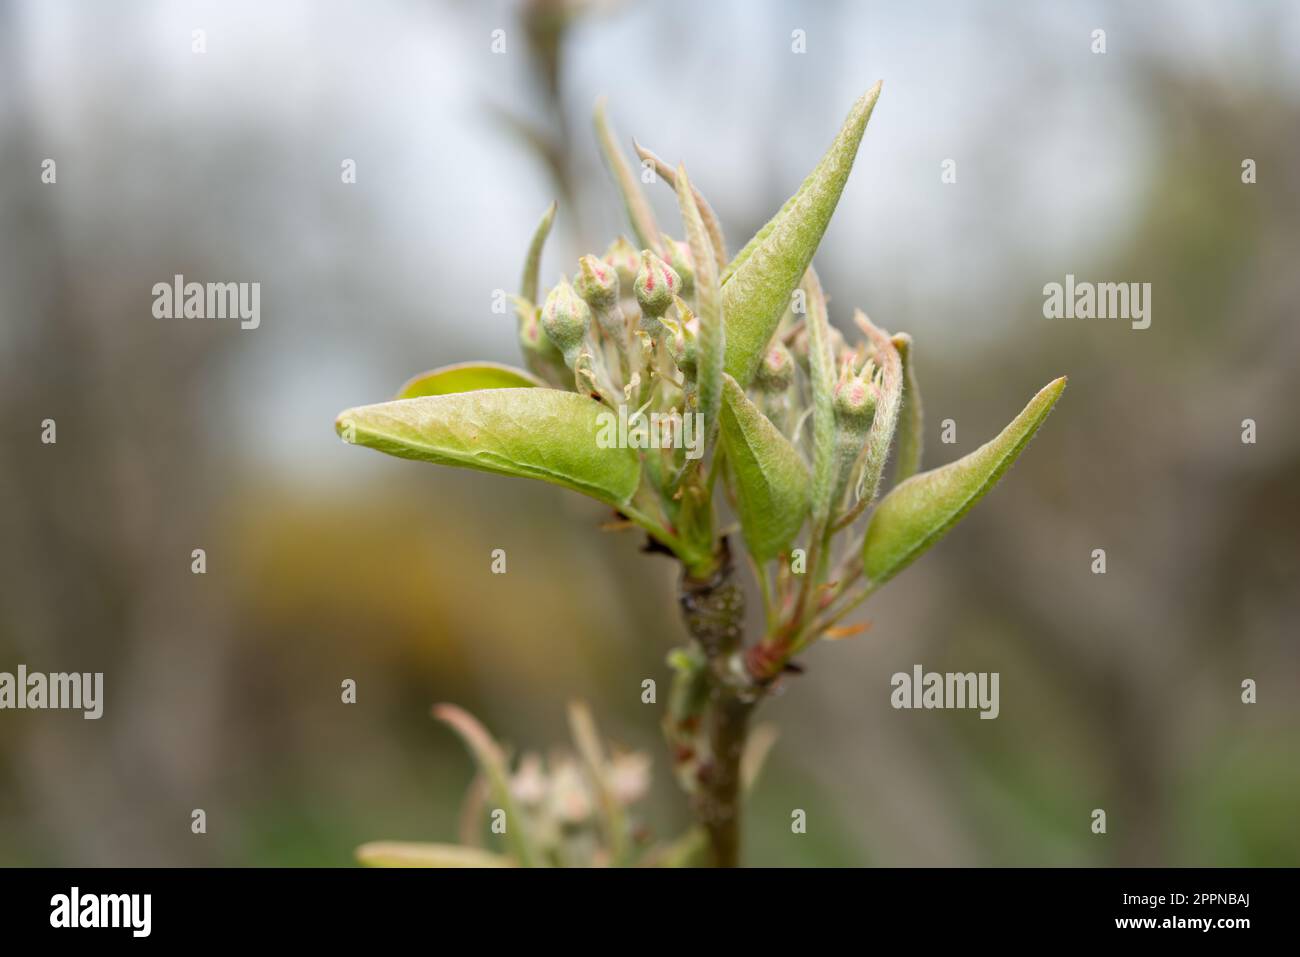 pear fruit tree blossom bud cluster with new foliage on a bokeh background Stock Photo